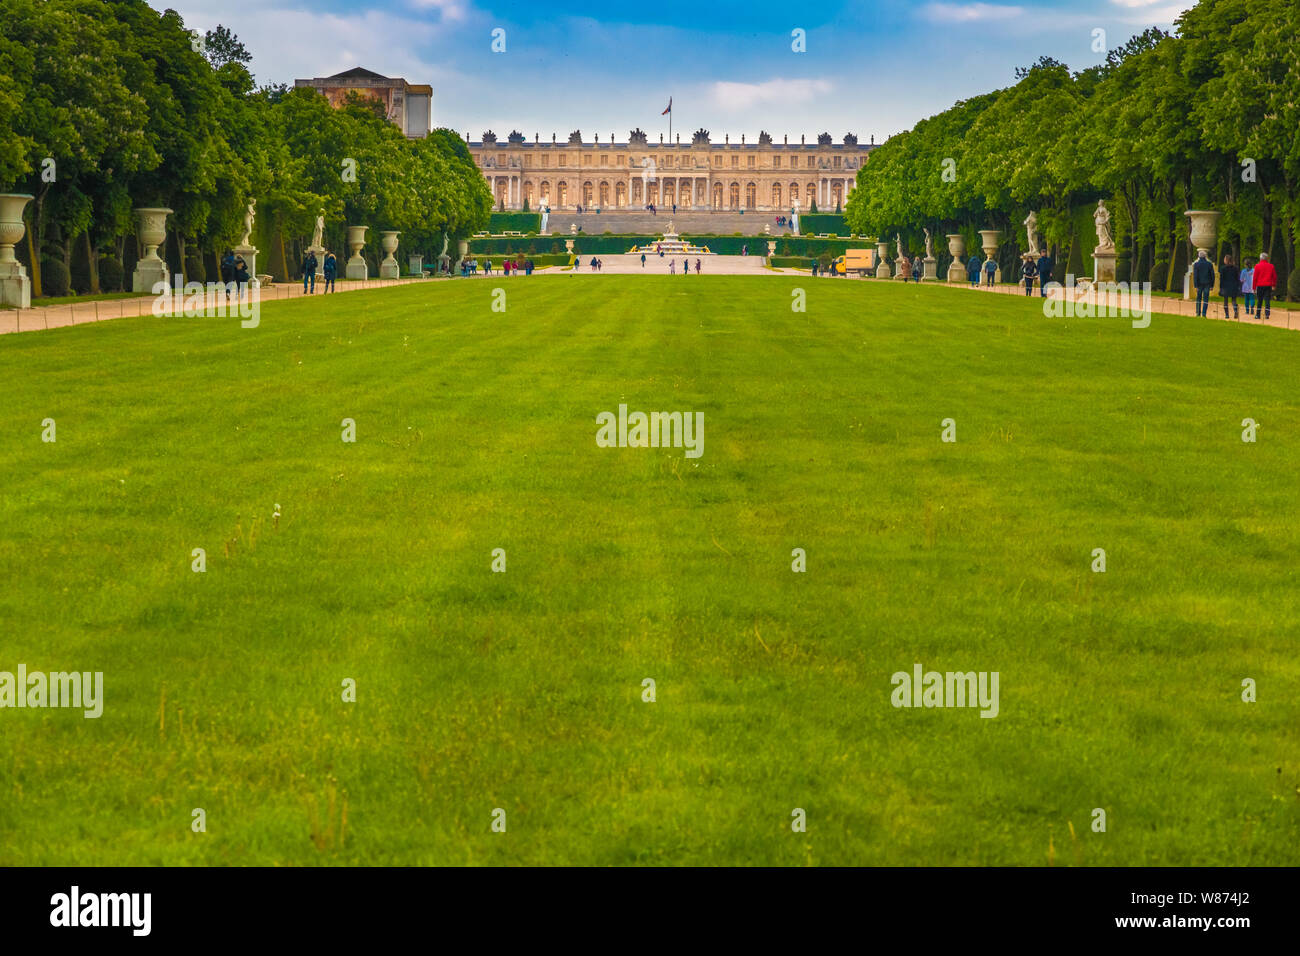 Nice panoramic landscape view of the garden façade of the famous Palace of Versailles from the large lawn or green carpet (Tapis Vert) between the... Stock Photo